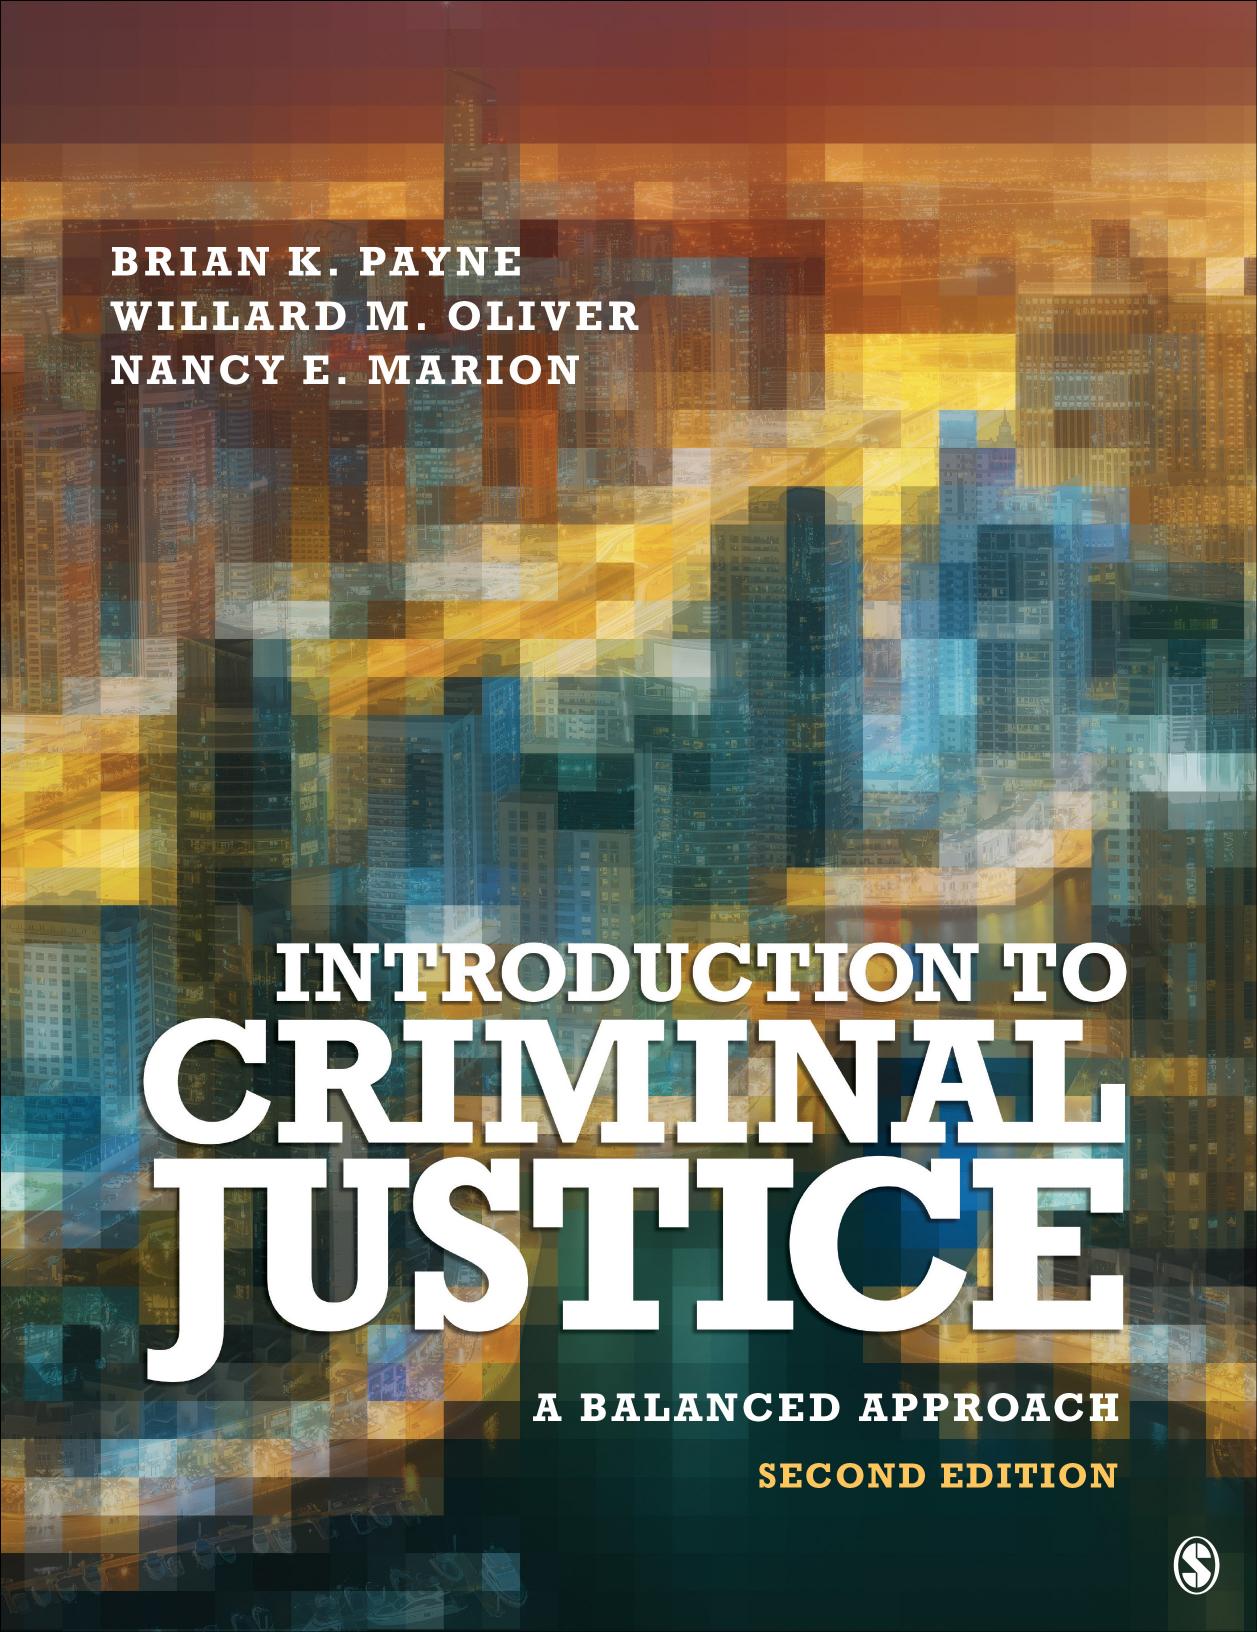 Introduction to Criminal Justice - A Balanced Approach by Brian K. Payne Willard M. Oliver Nancy E. Marion